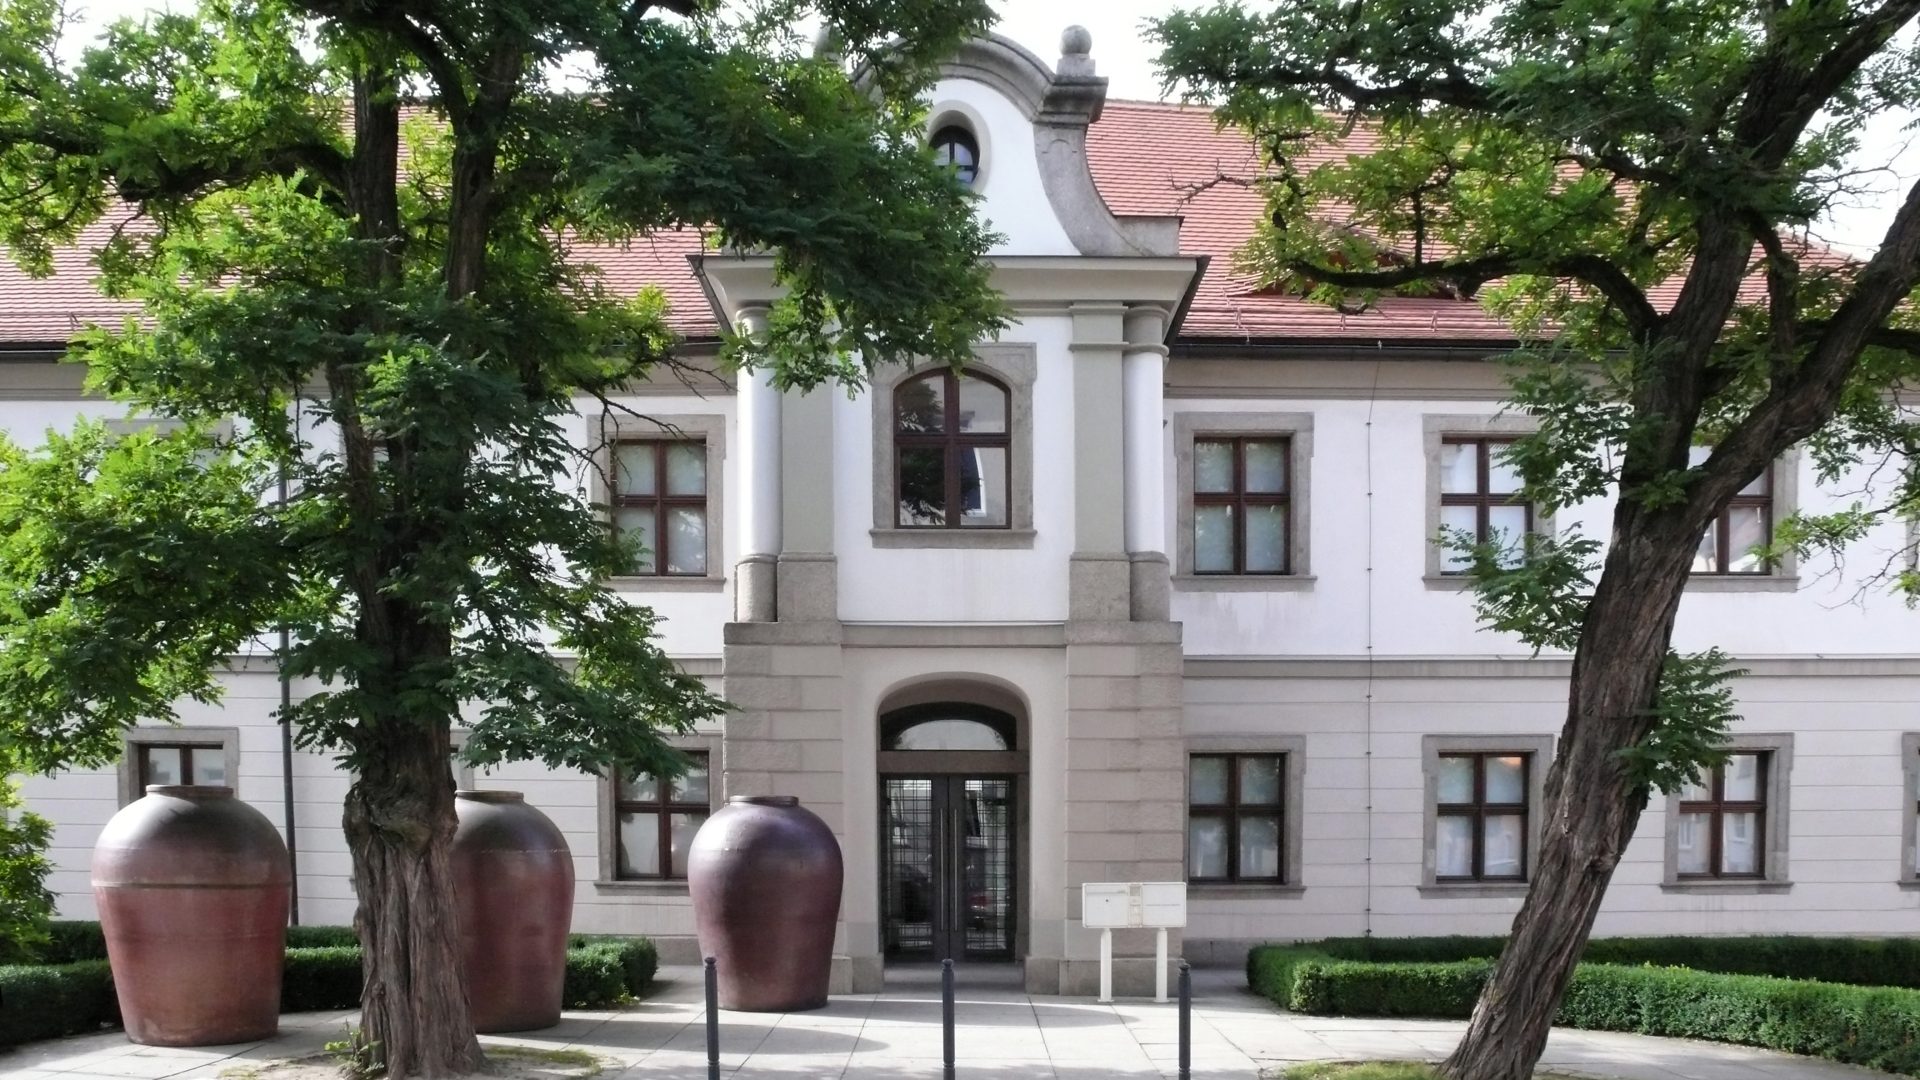 Exterior view of Museum Weiden, entrance: gray-white neo-baroque building with trees in front of it.